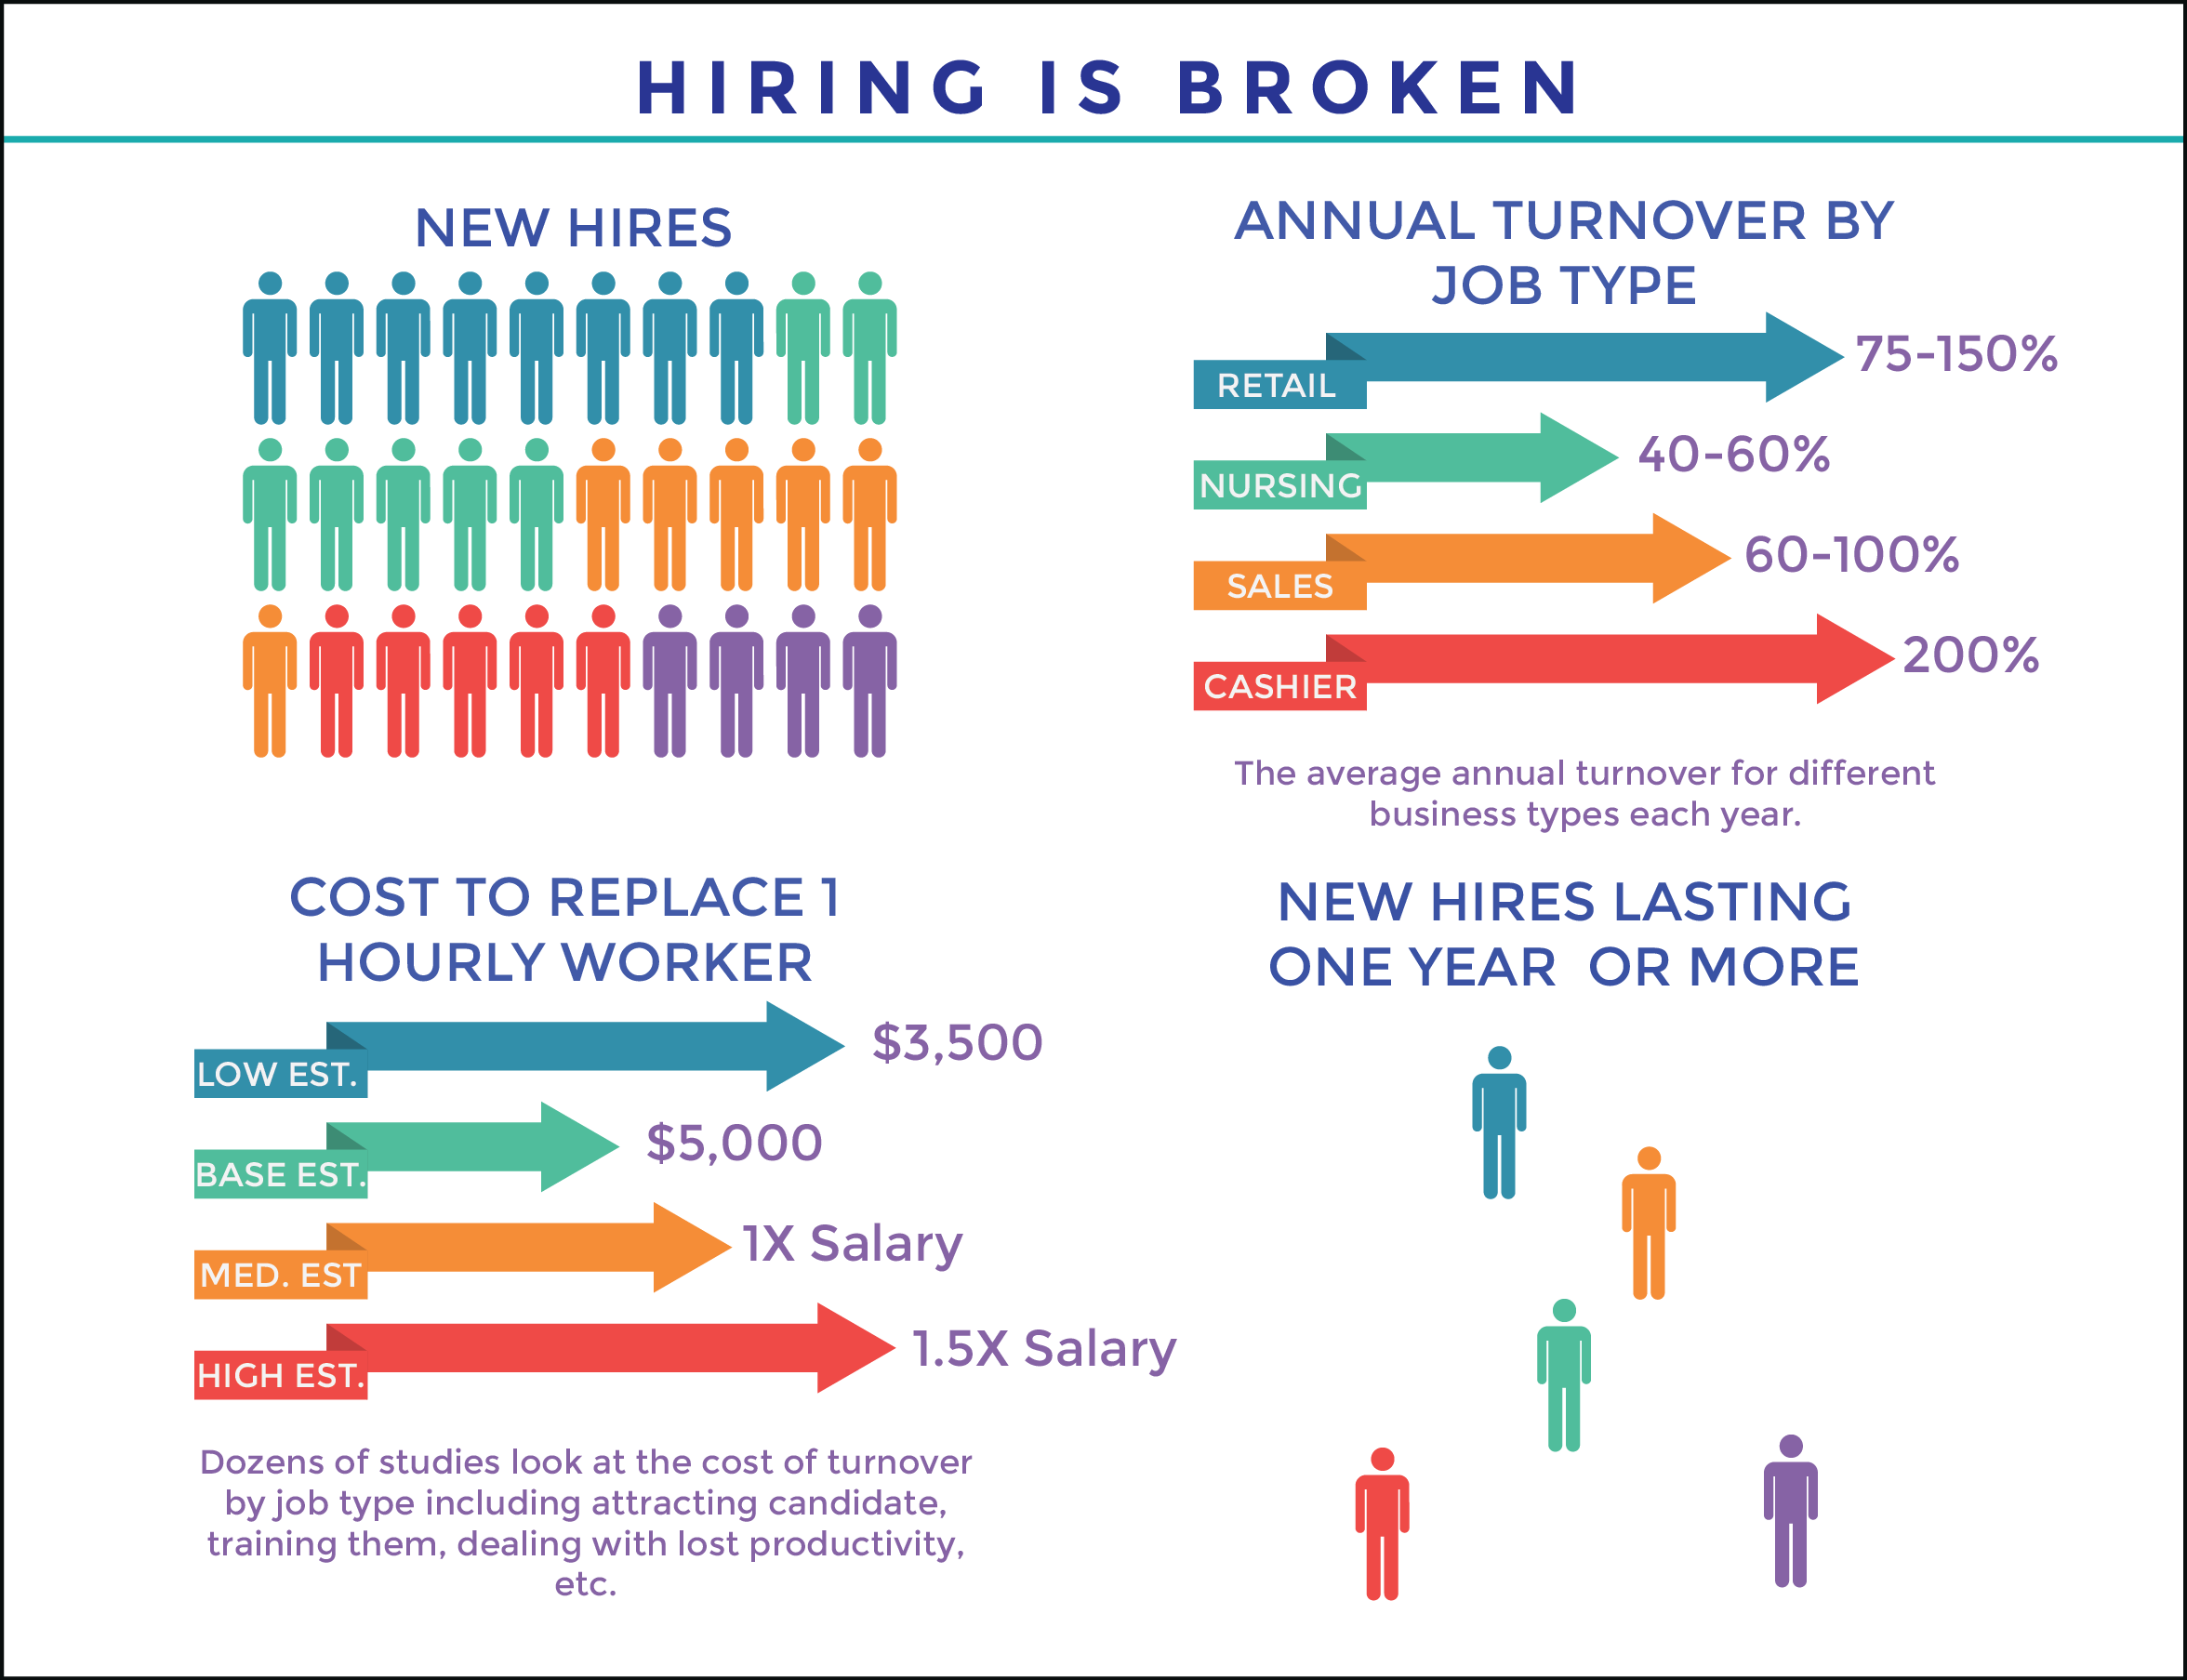 How to hire employees: an update on what works and doesn't